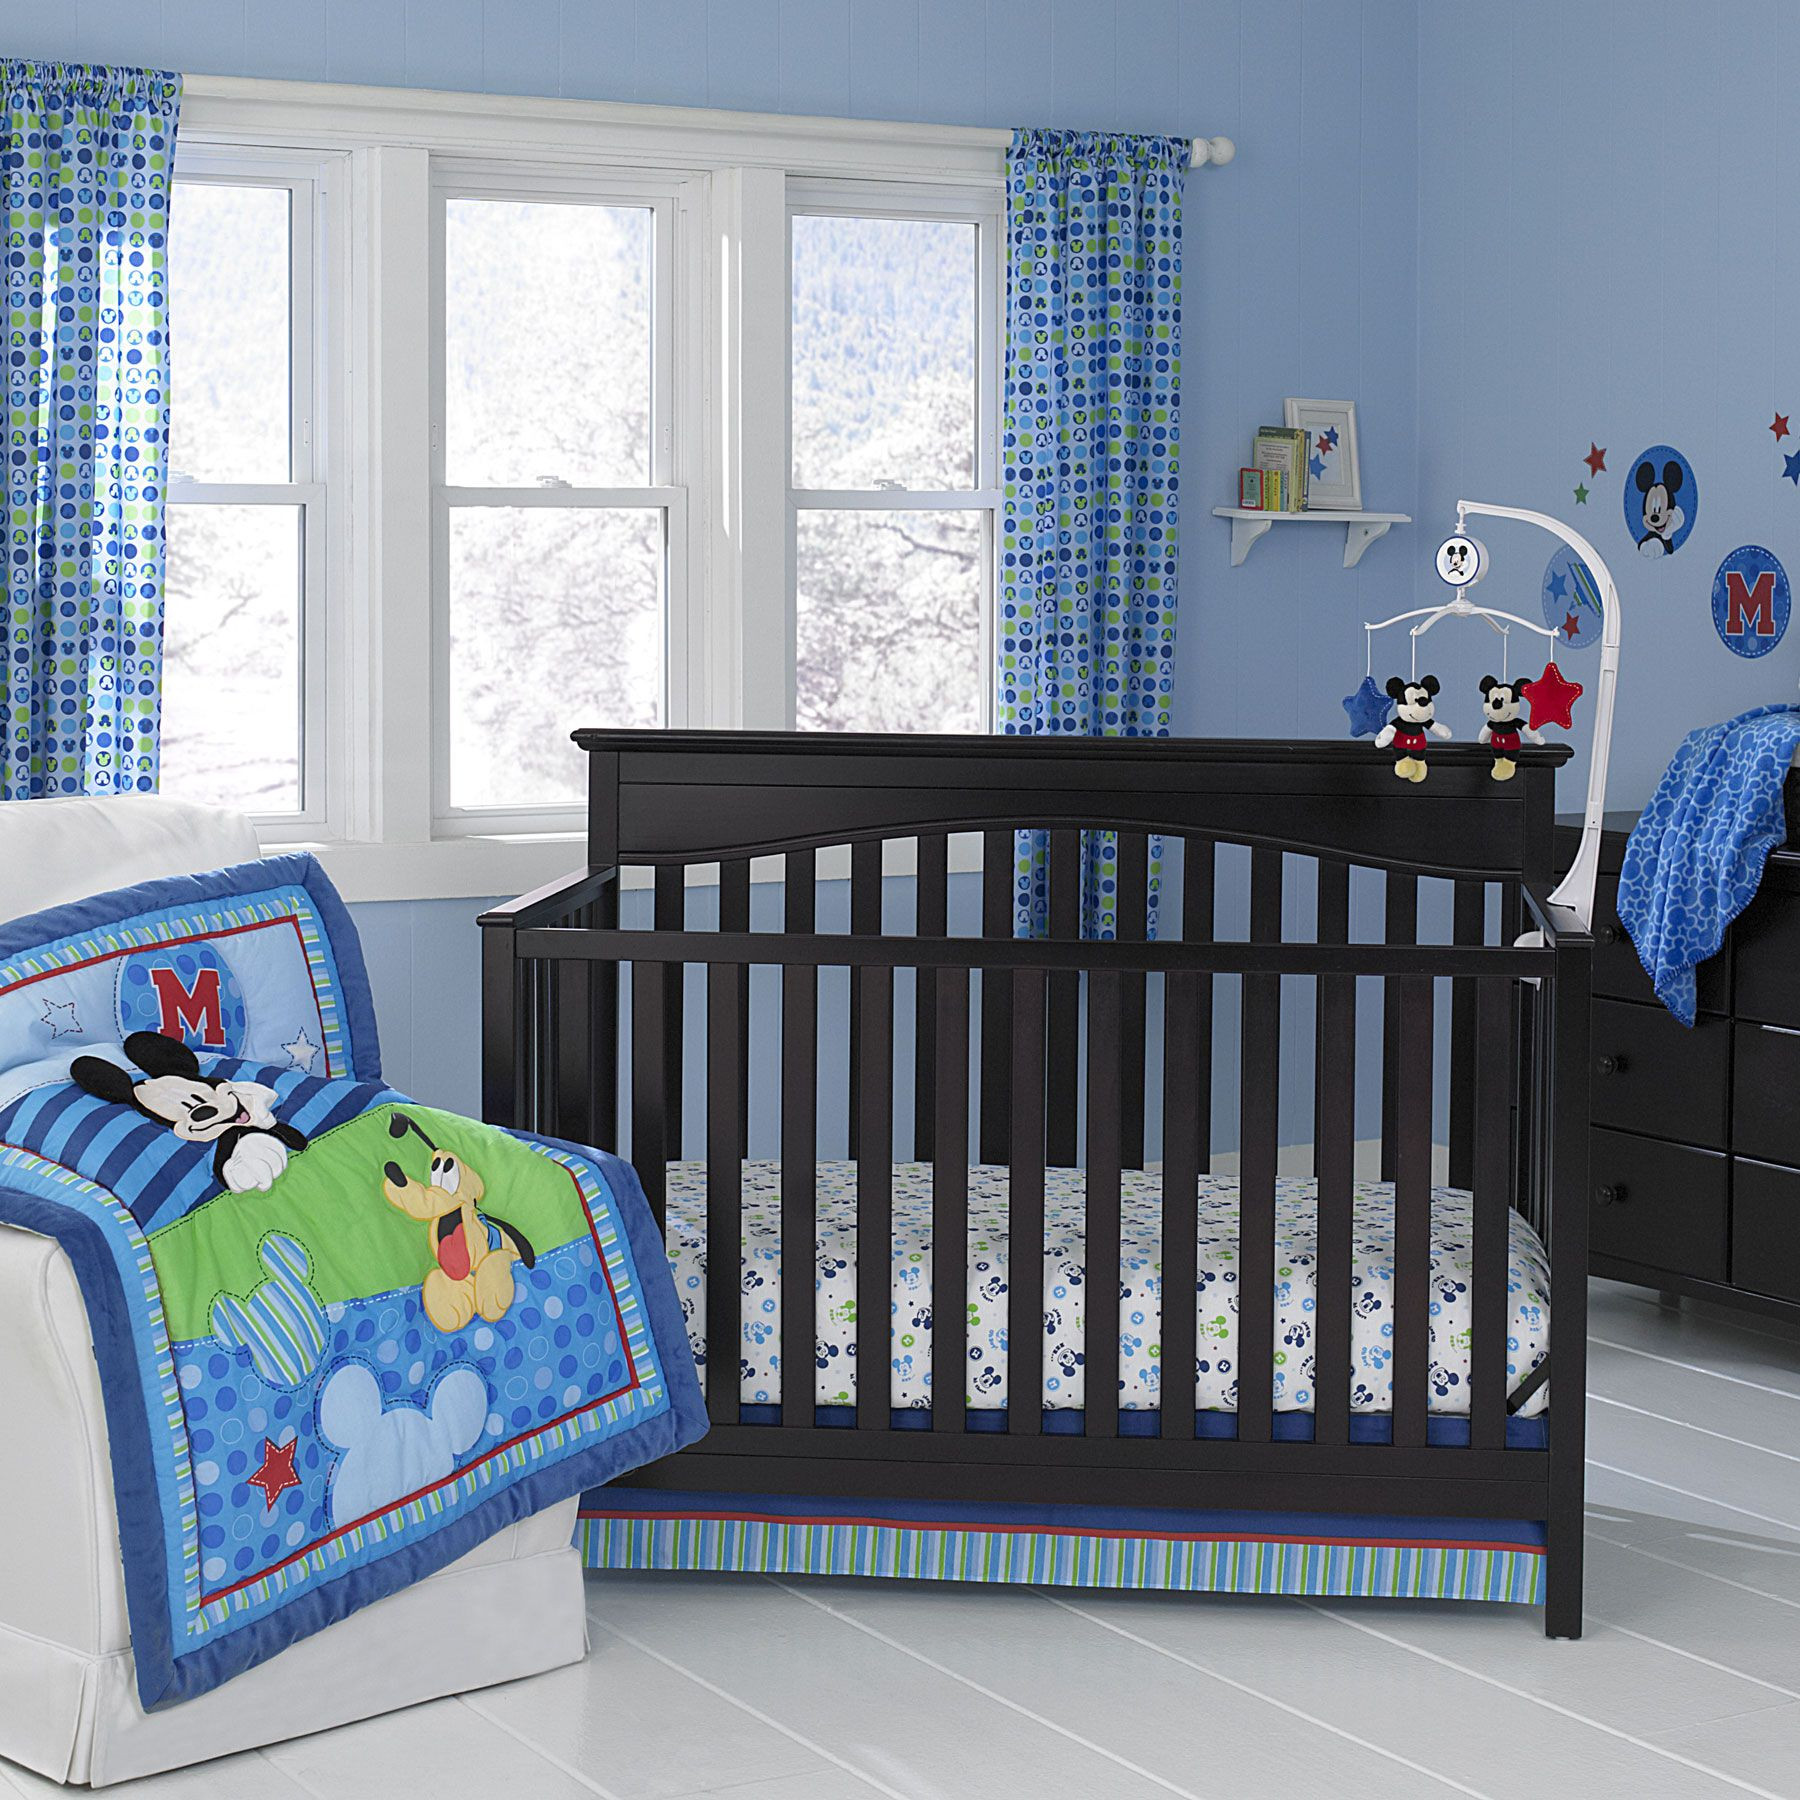 Mickey Mouse Room Decor For Baby
 17 Amazing Disney Wallpaper Options for Your Baby s